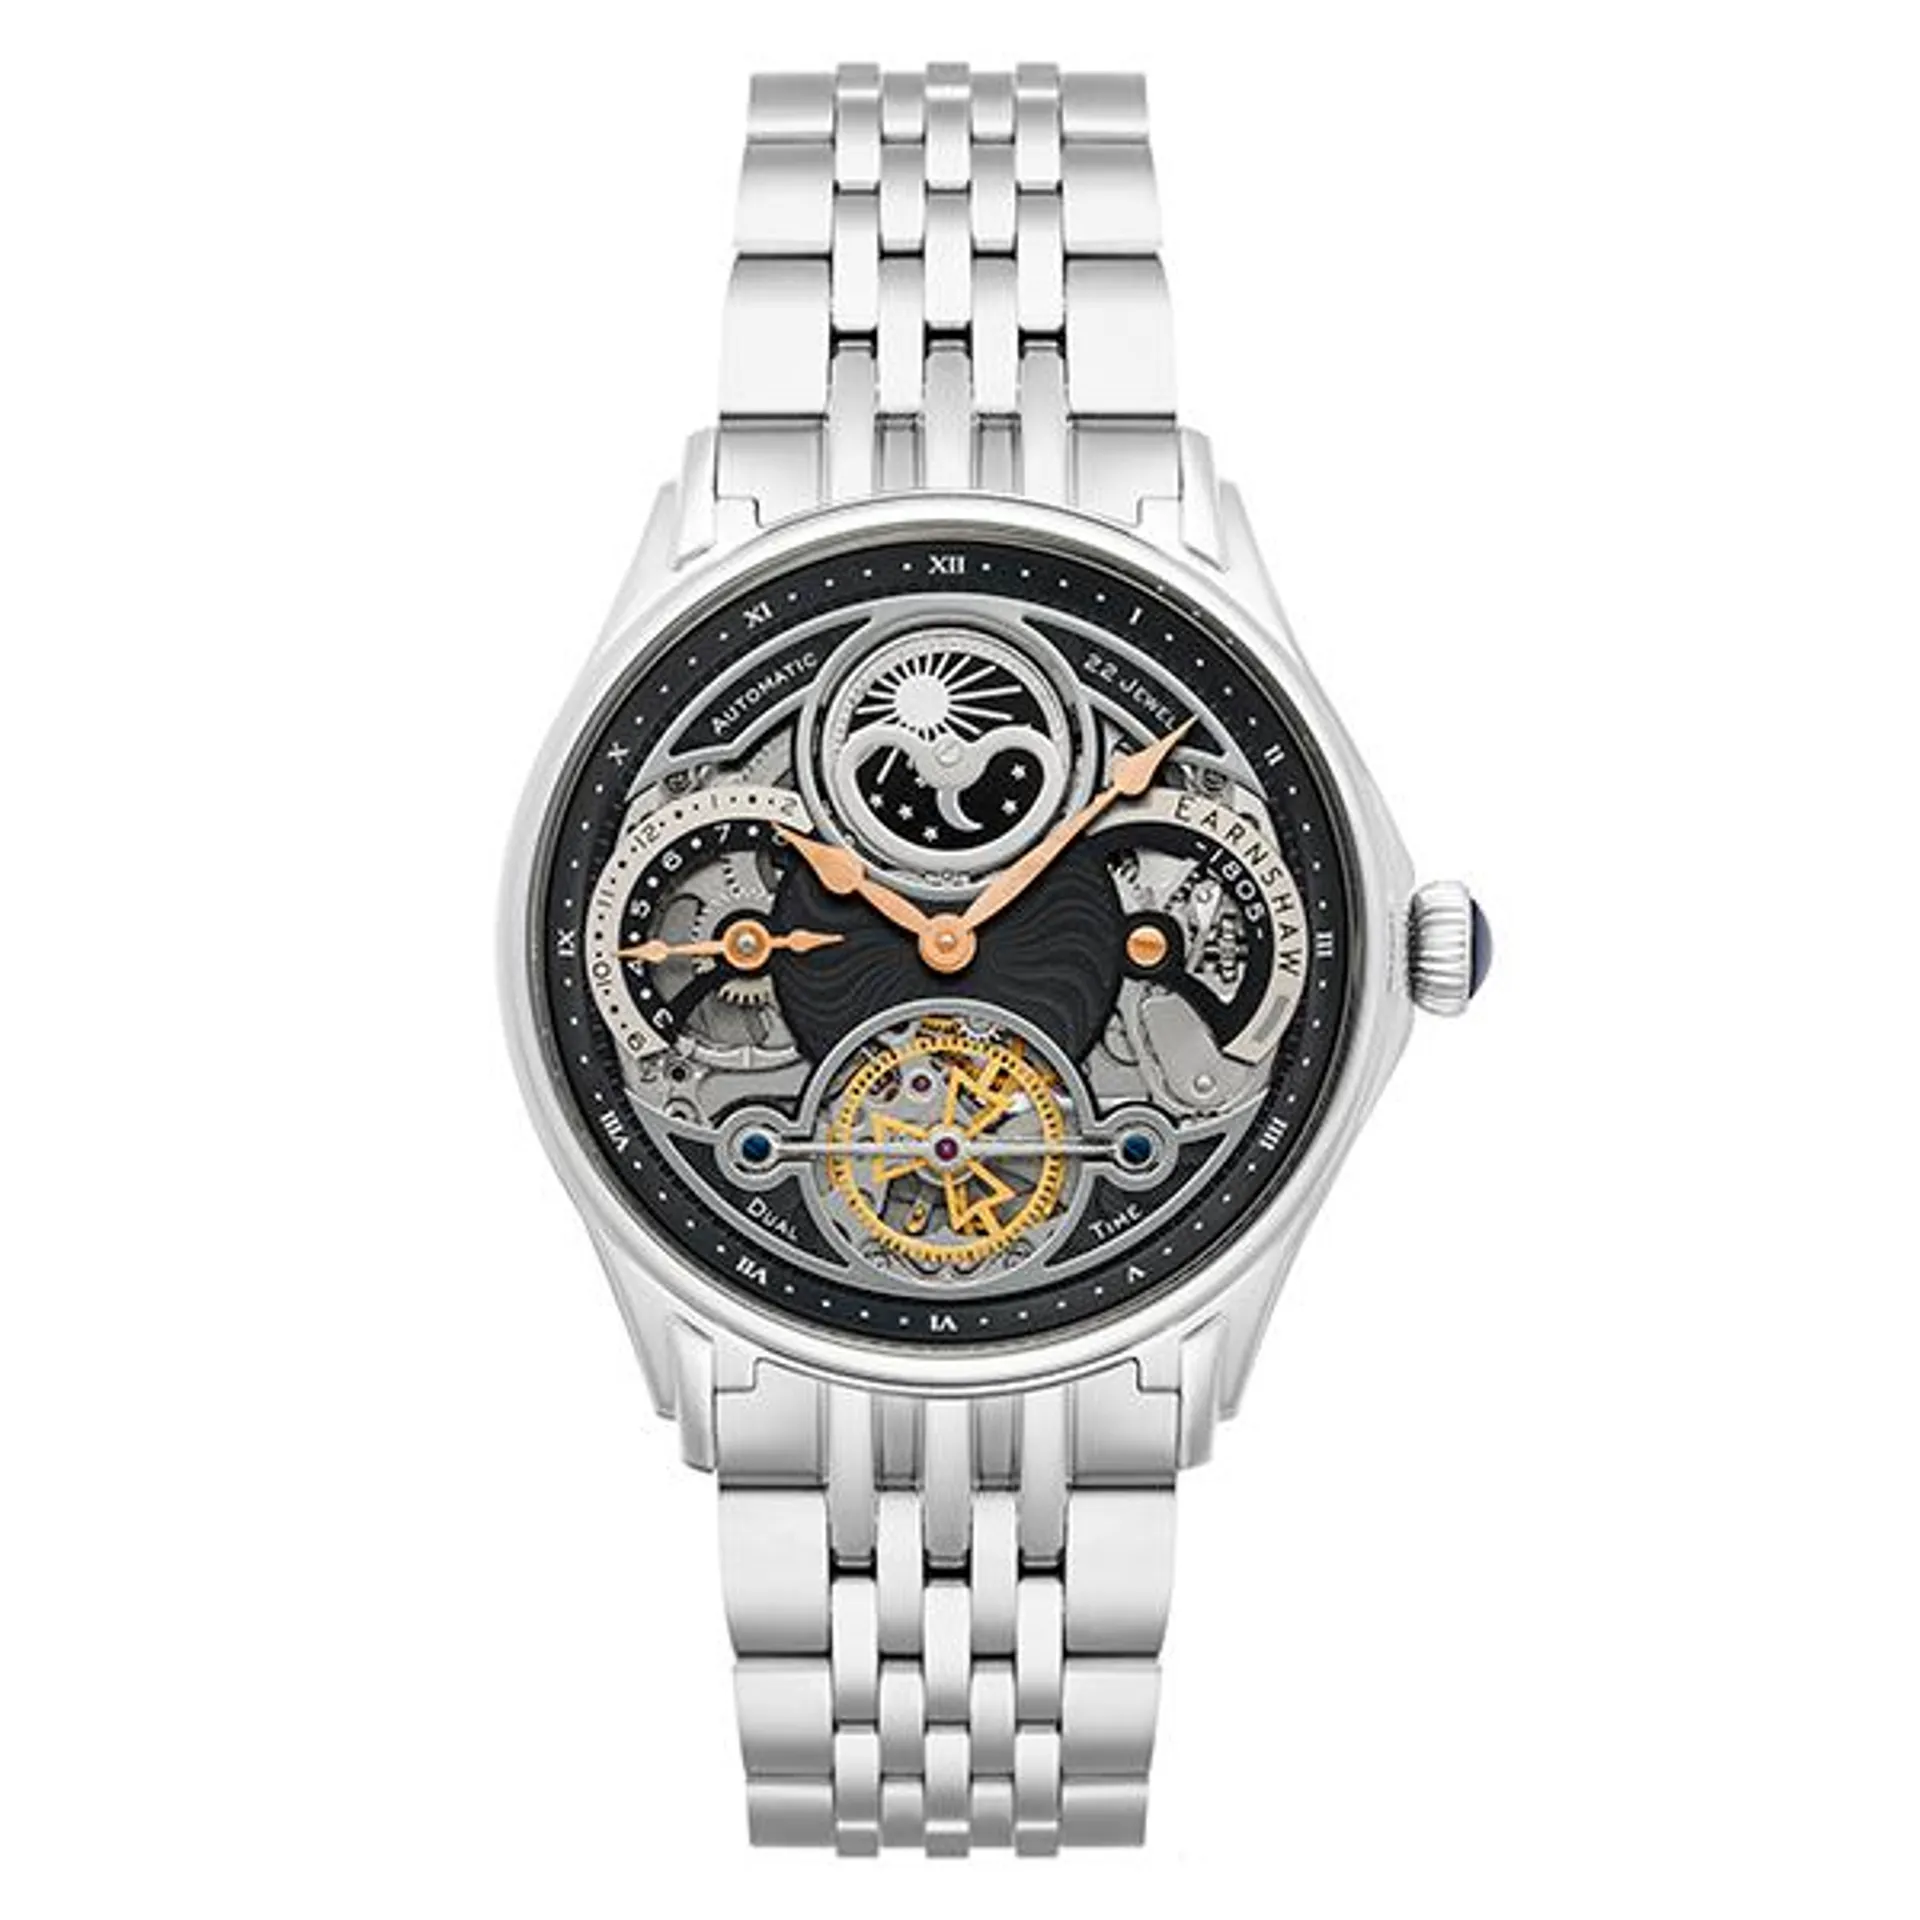 Thomas Earnshaw Gents Nasmyth Sun Moon Dual Time Watch with Stainless Steel Bracelet